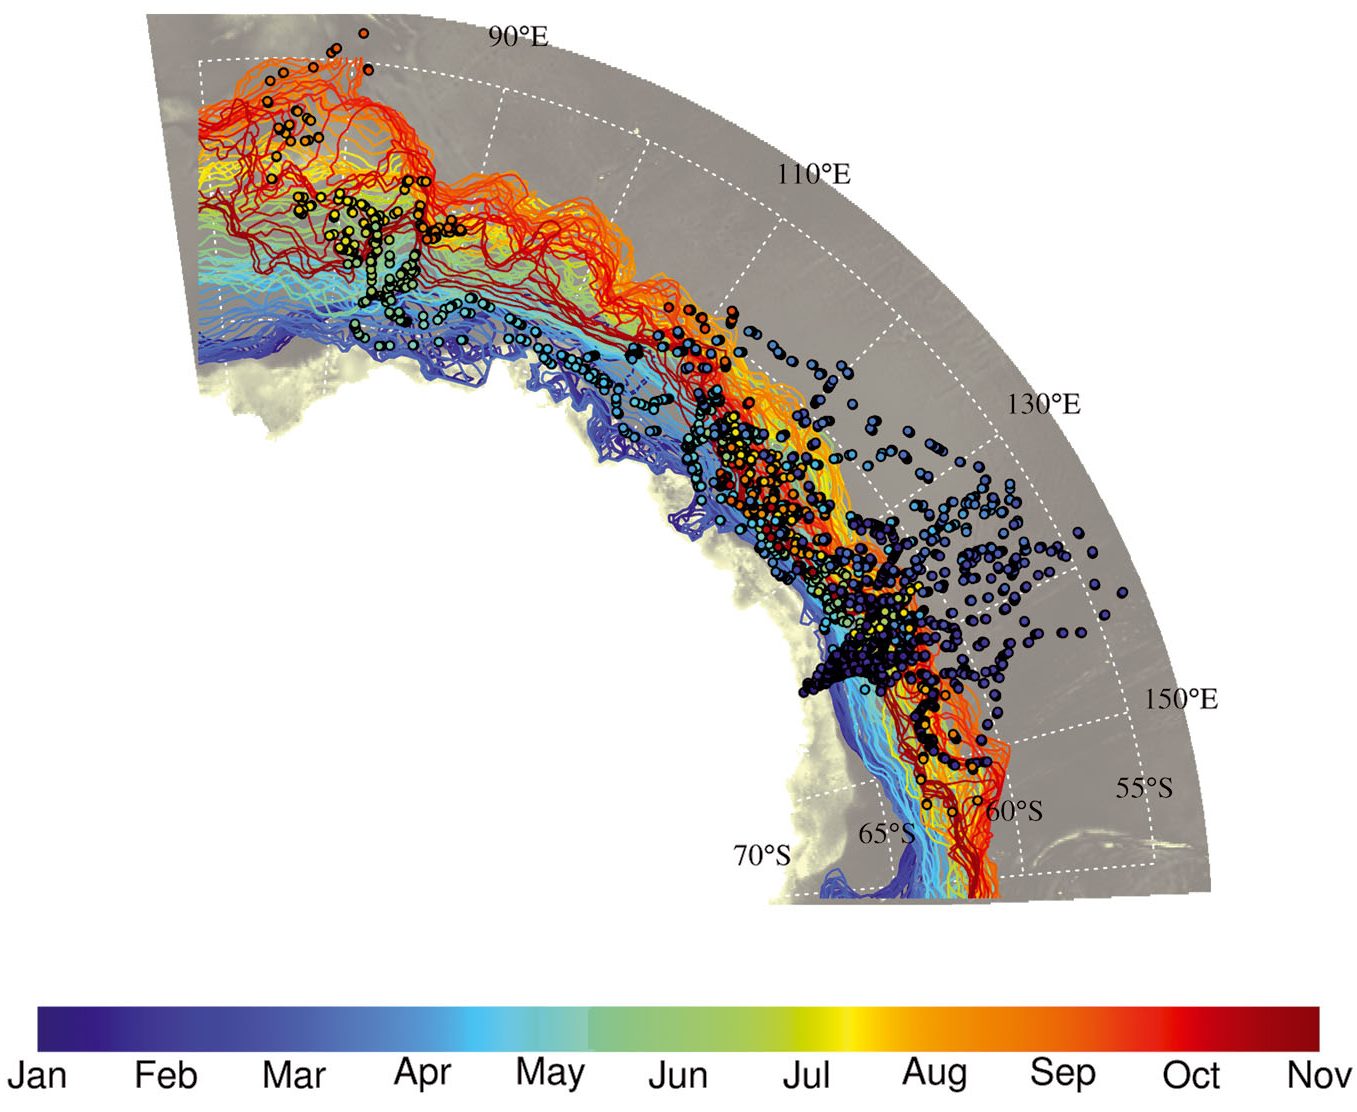 Tracks of the 15 juvenile emperor penguins (dots) and sea ice edge (lines) at different times of the year 2014